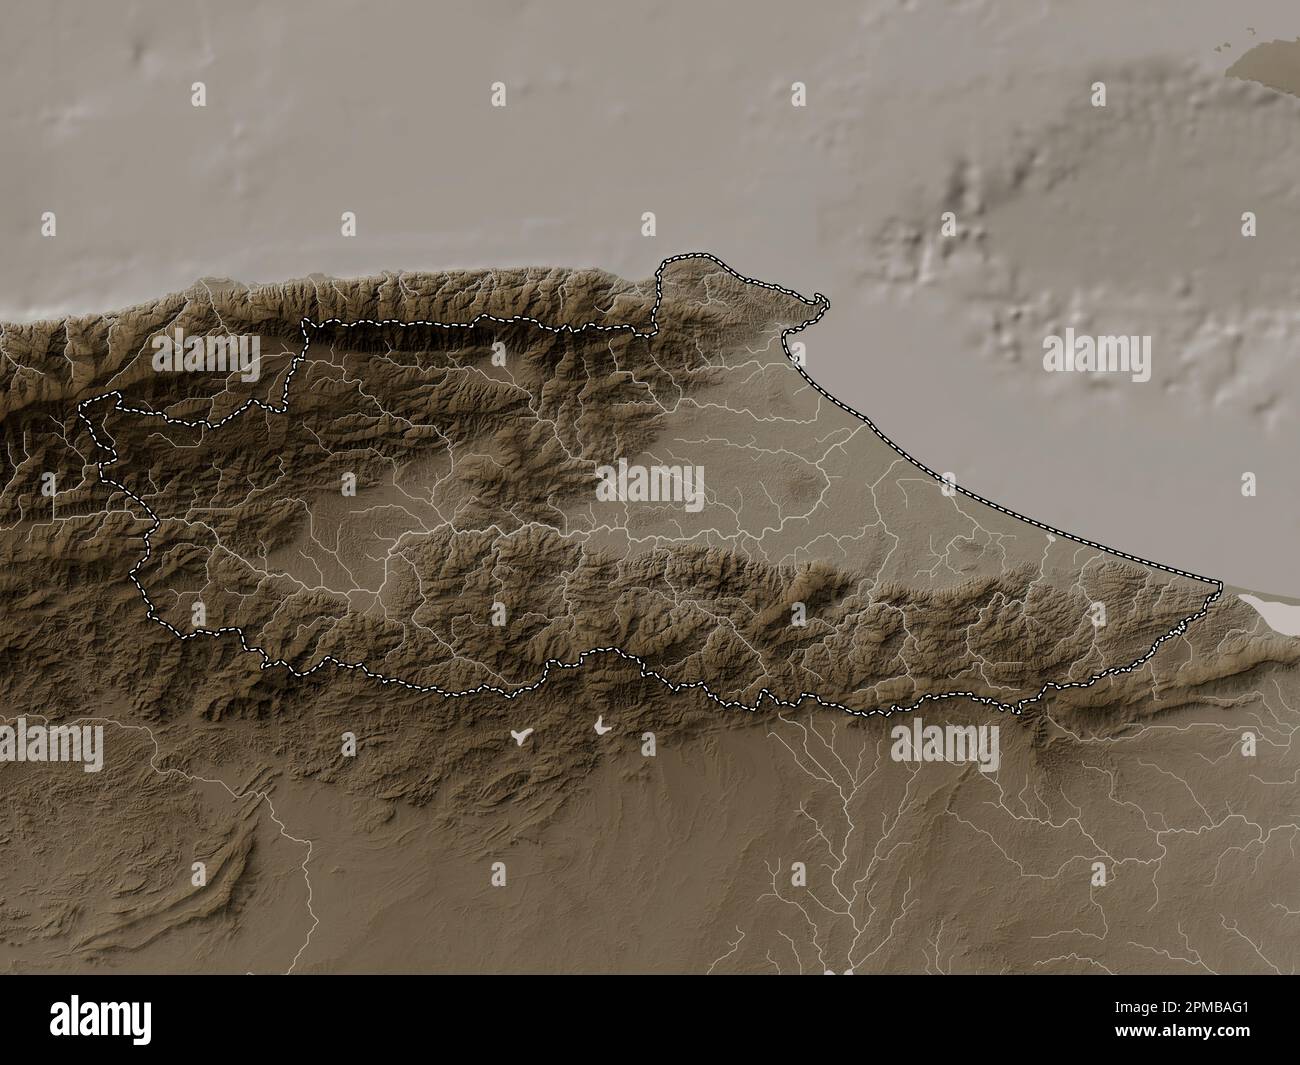 Miranda, state of Venezuela. Elevation map colored in sepia tones with lakes and rivers Stock Photo